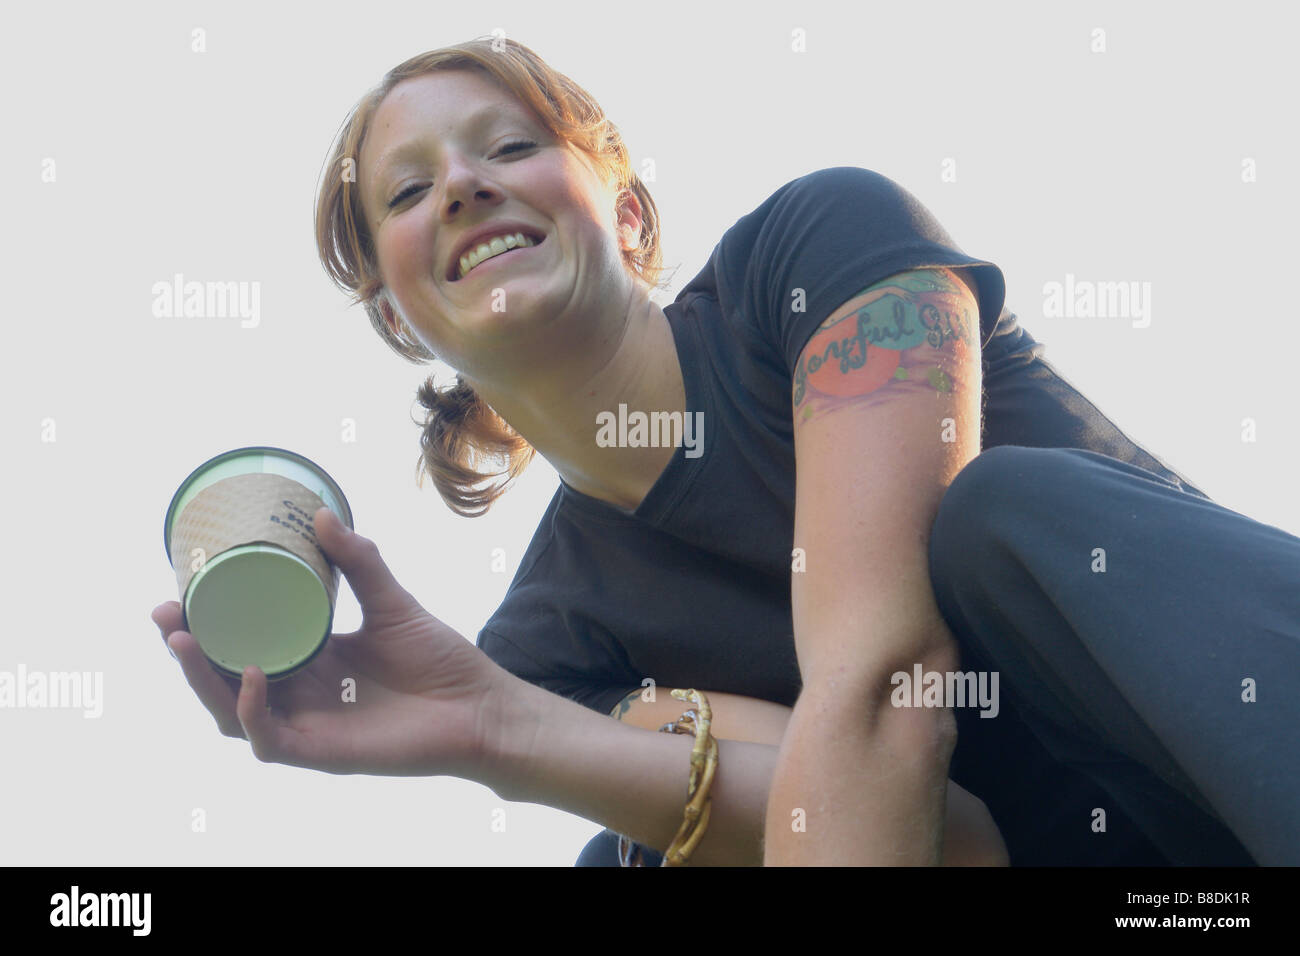 Low angle portrait of woman holding corn-based compostable coffee cup Stock Photo